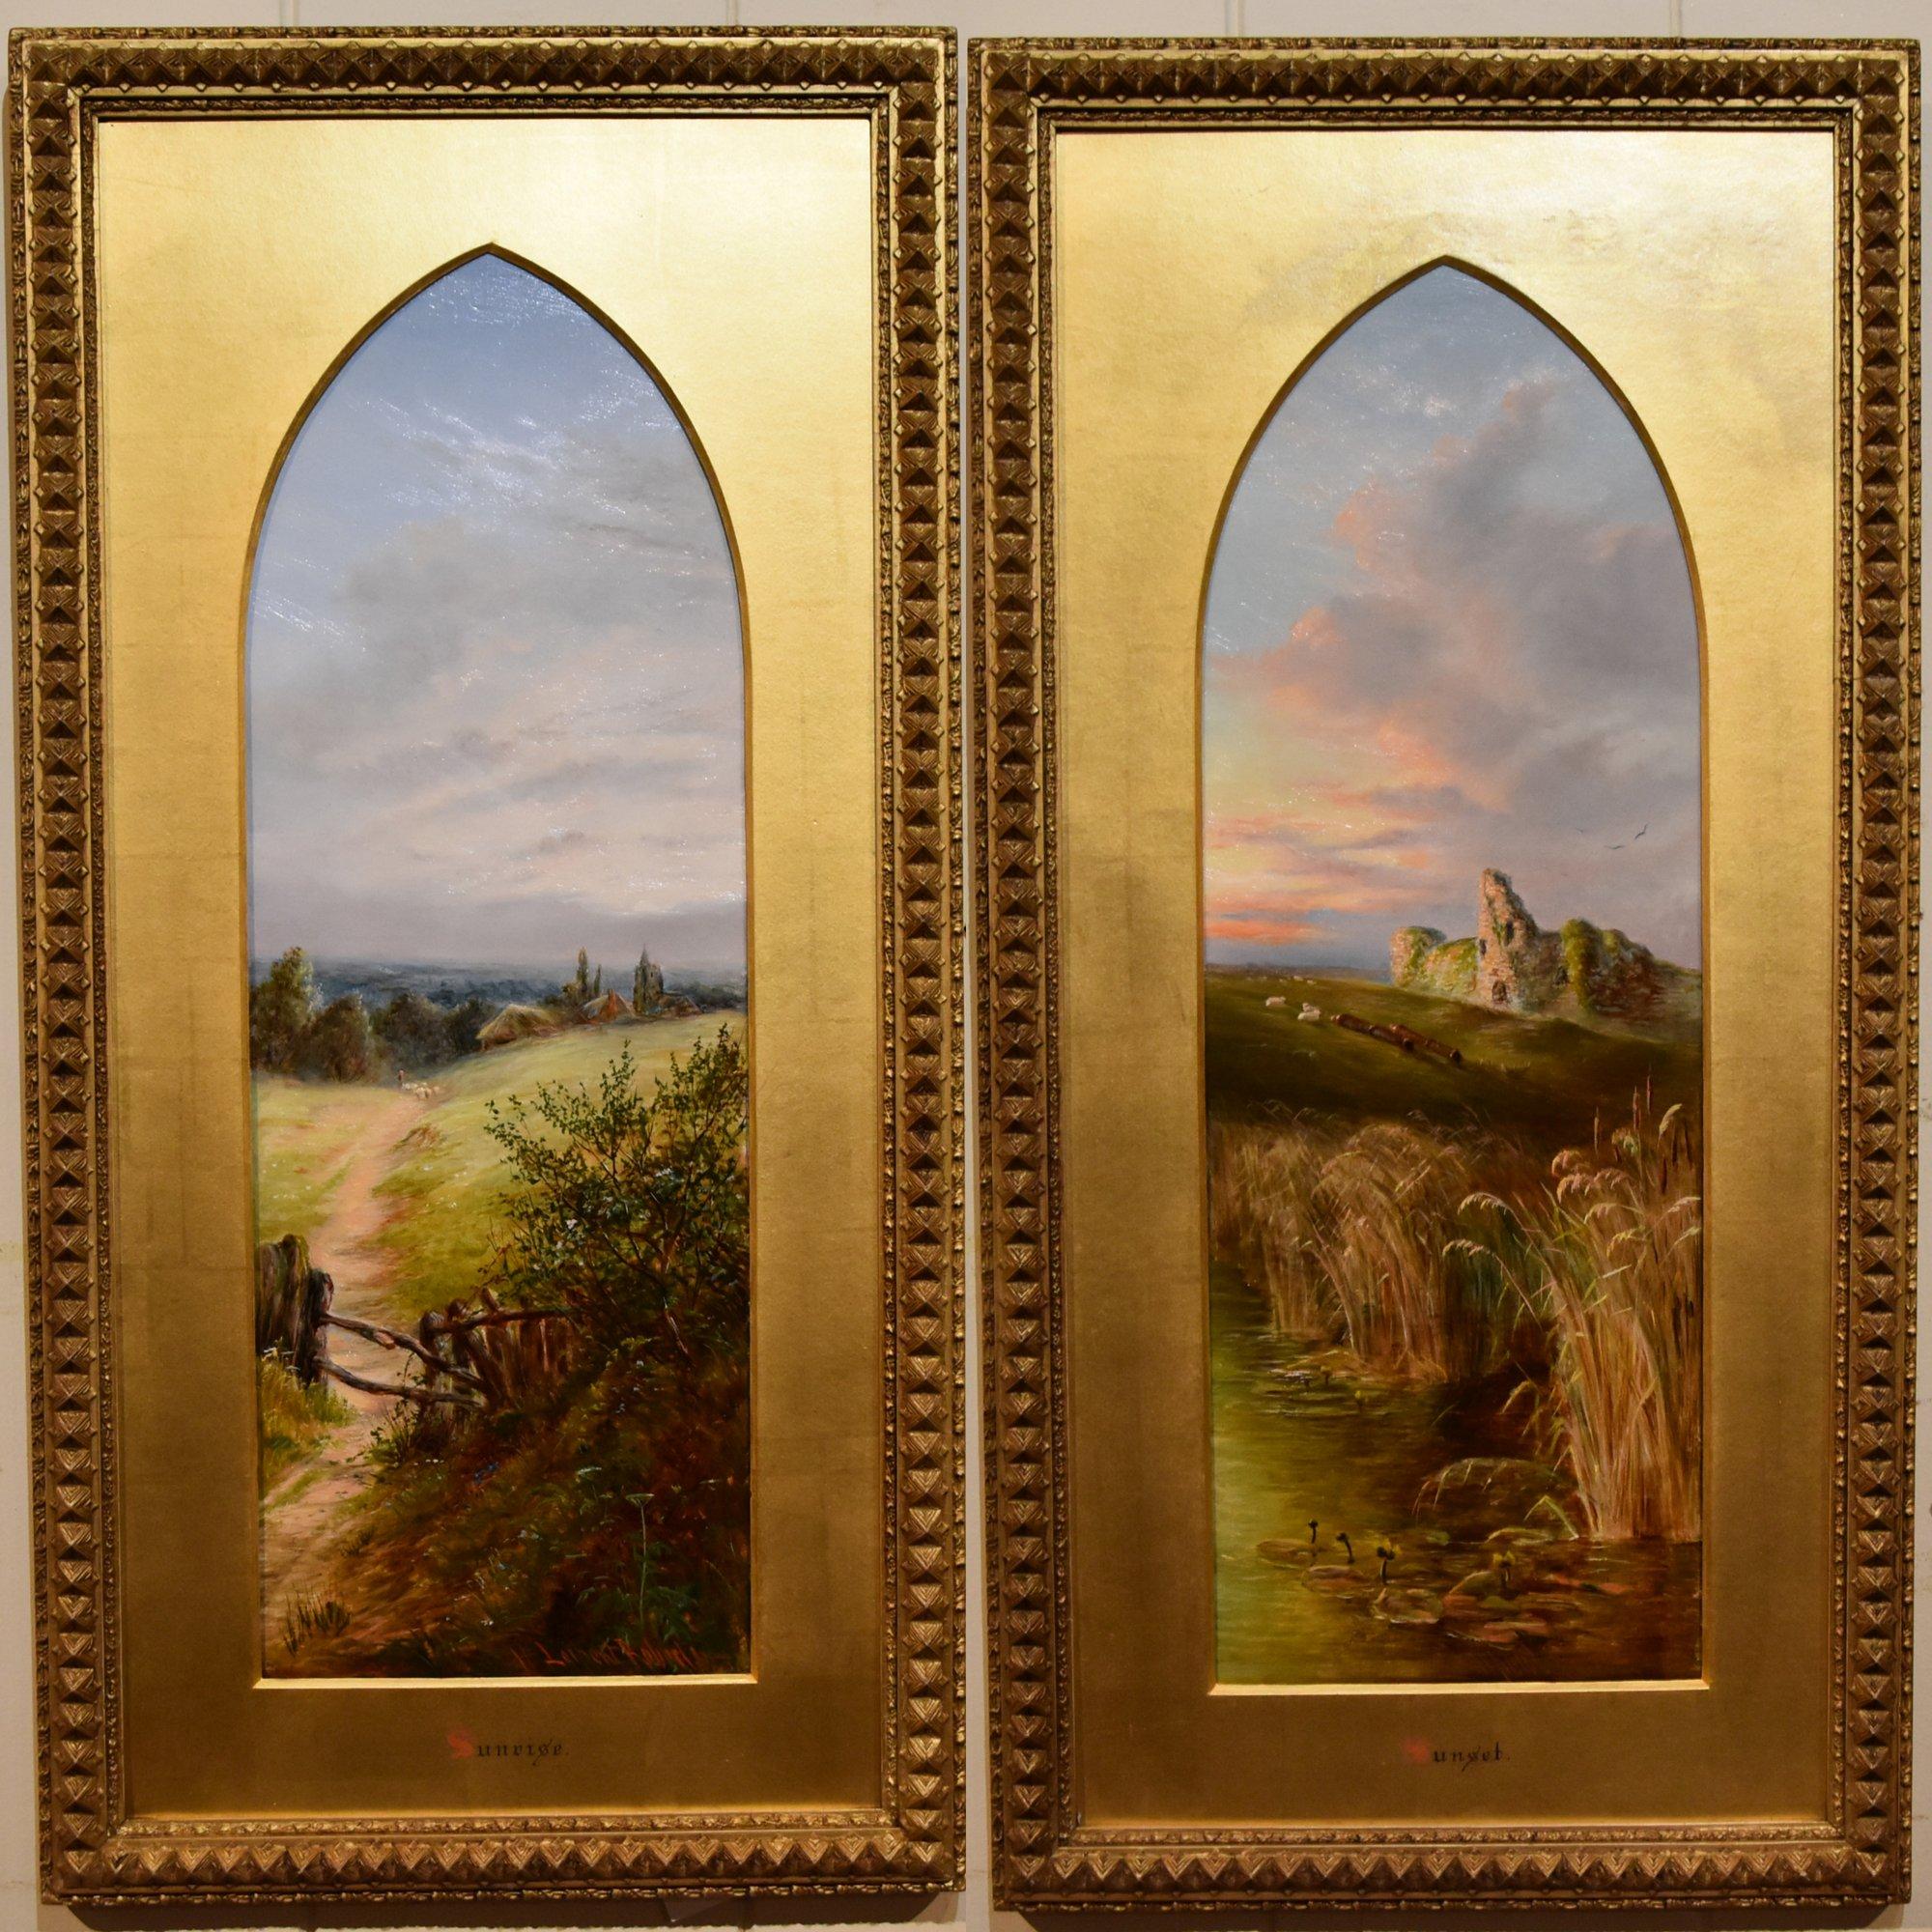 Oil Painting Pair by Henry Larpent Roberts "Sunrise and Sunset" 1830 - 1890painter of pre-Raphaelite style flower studies and landscapes often with arch tops. He exhibited at the Royal Academy and RBA. Both Oil on board. Signed and original